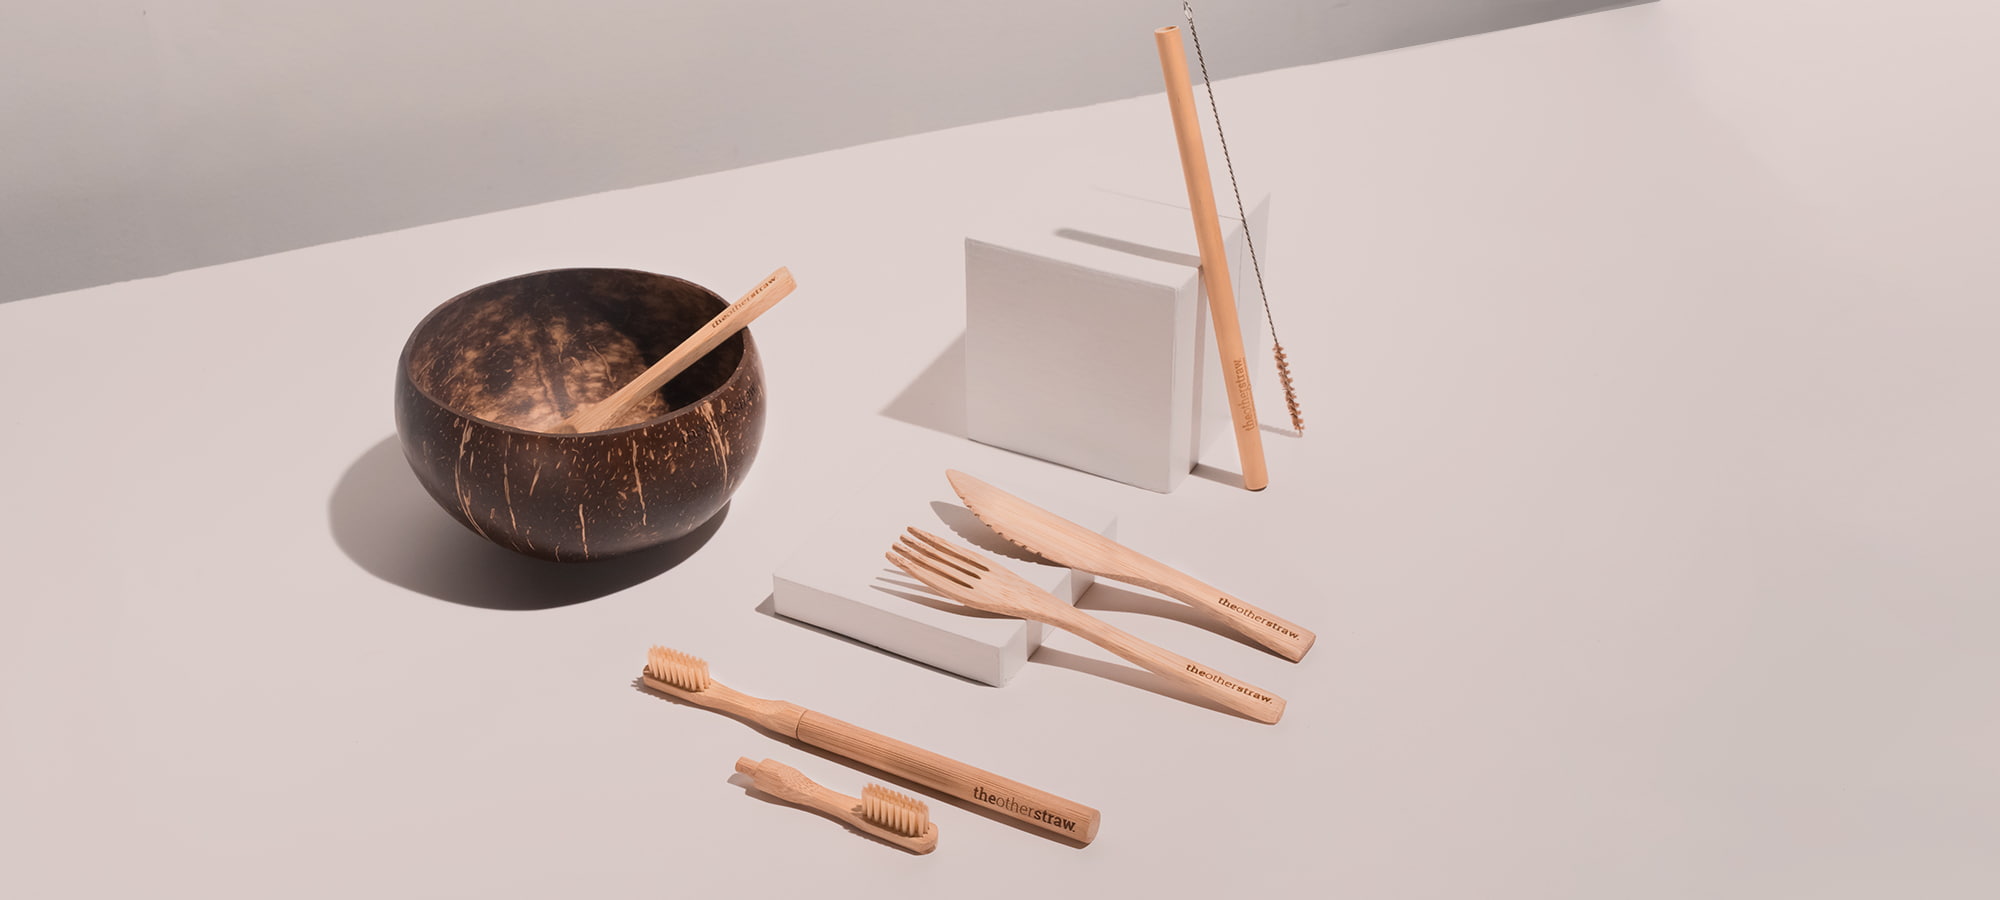 bamboo straw, bamboo cutlery, coconut bowl and bamboo toothbrush on table